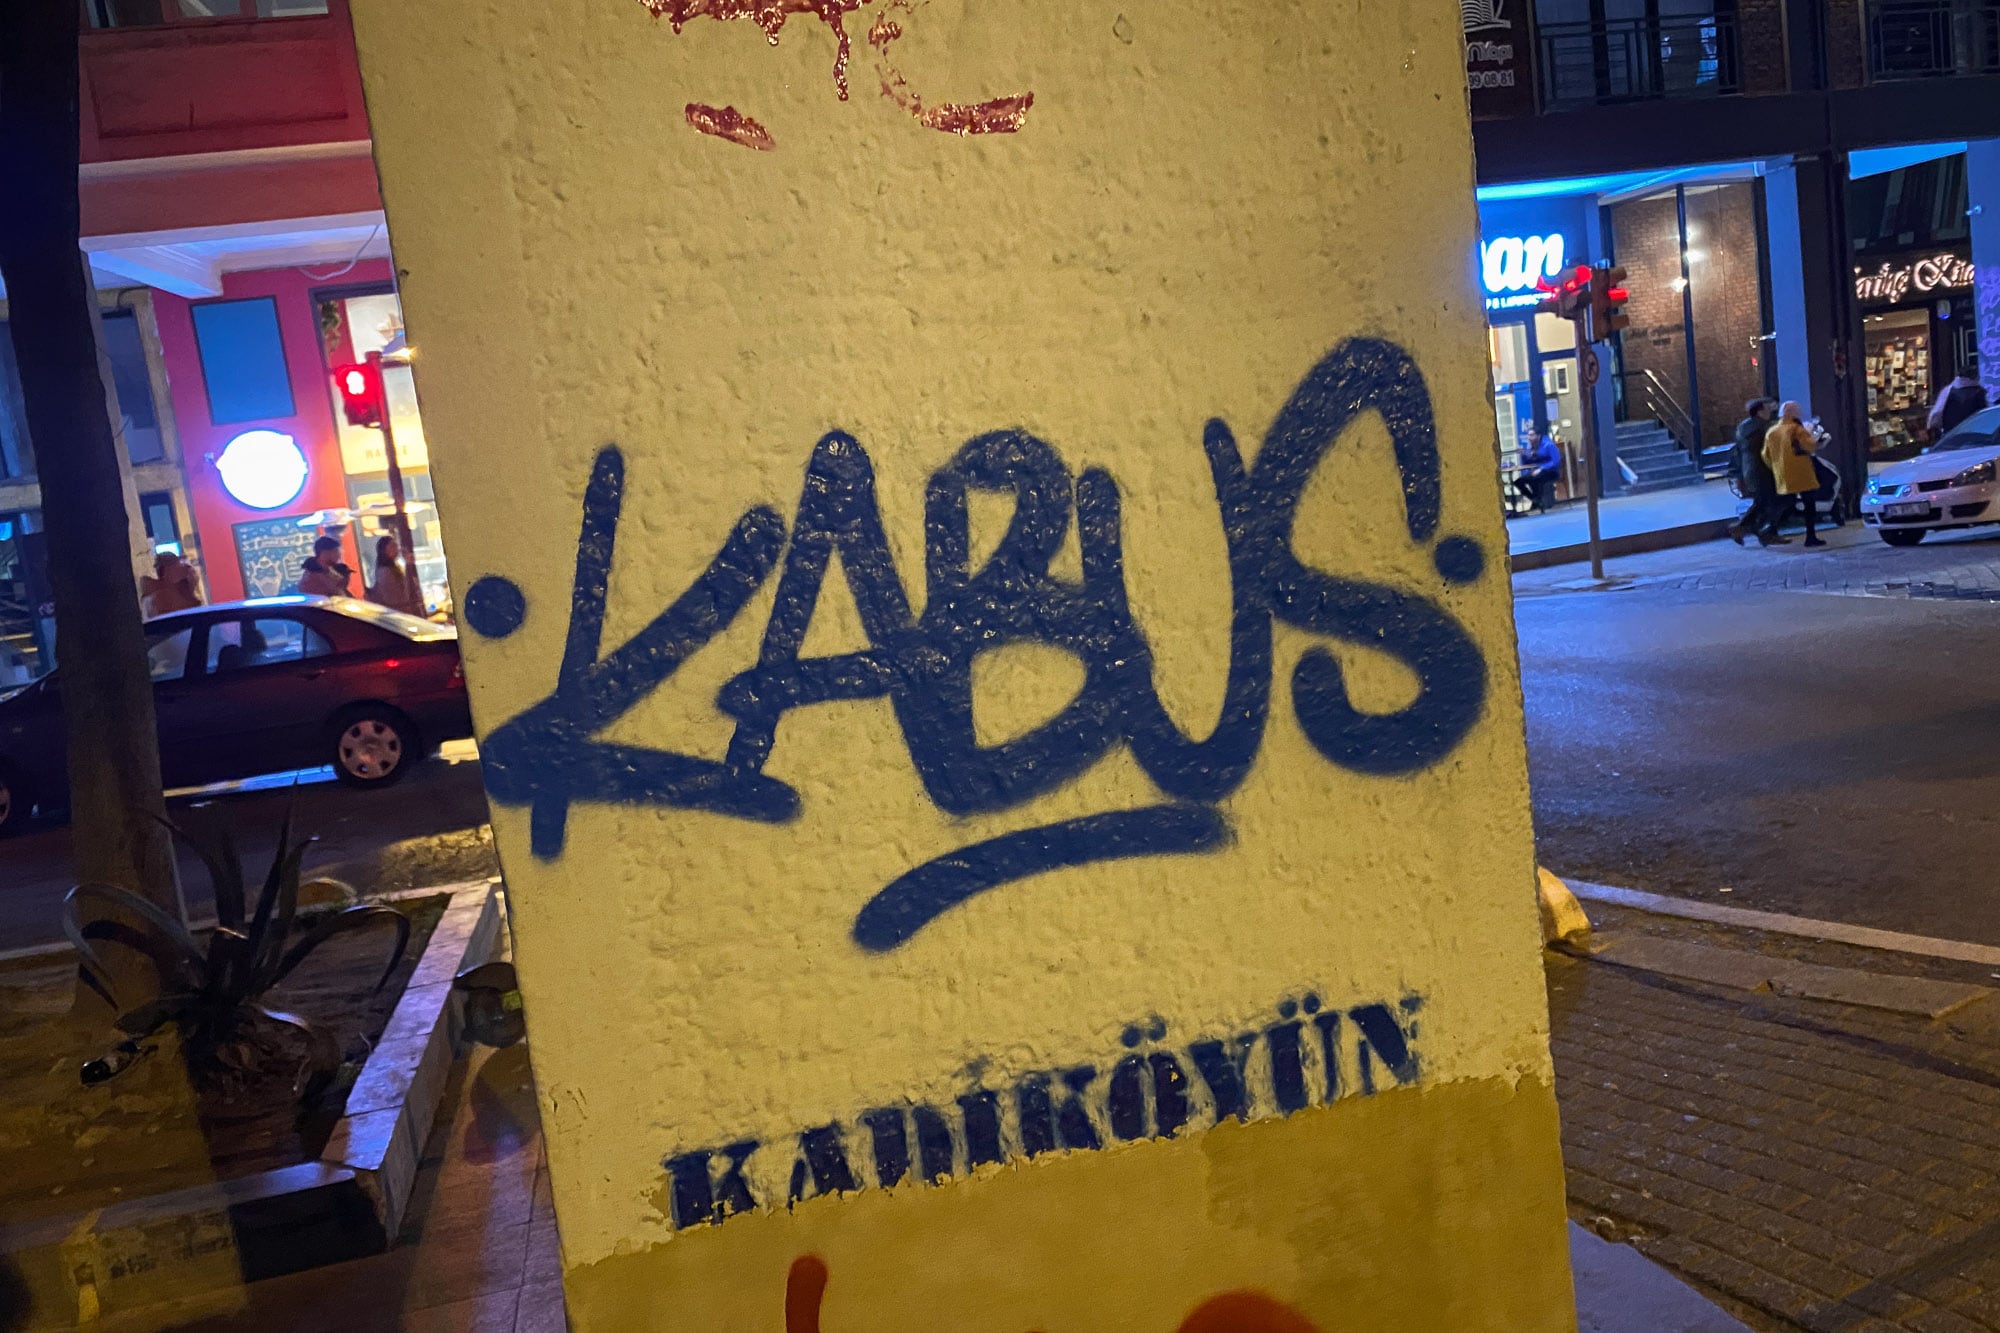 Kabus means nightmare